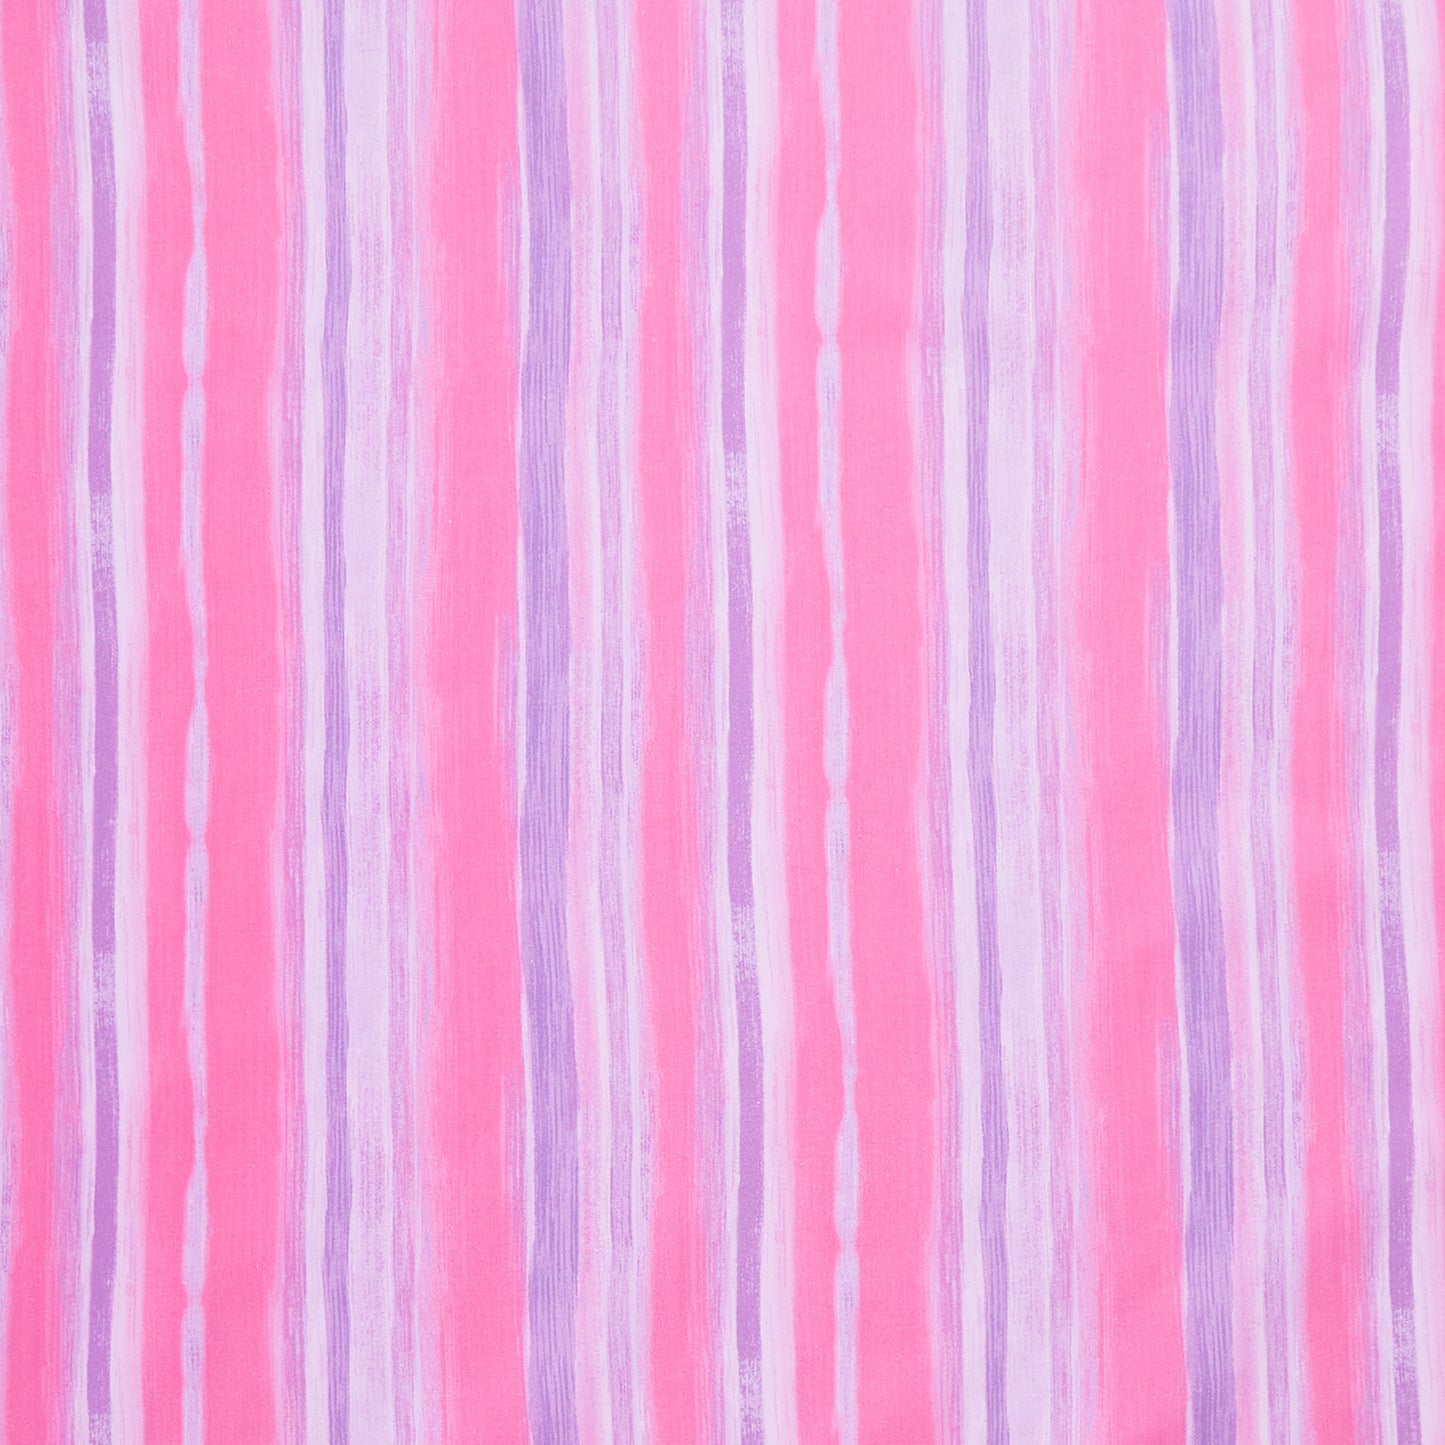 Fanciful Fronds - Soft Nature Stripes Pink Yardage Primary Image